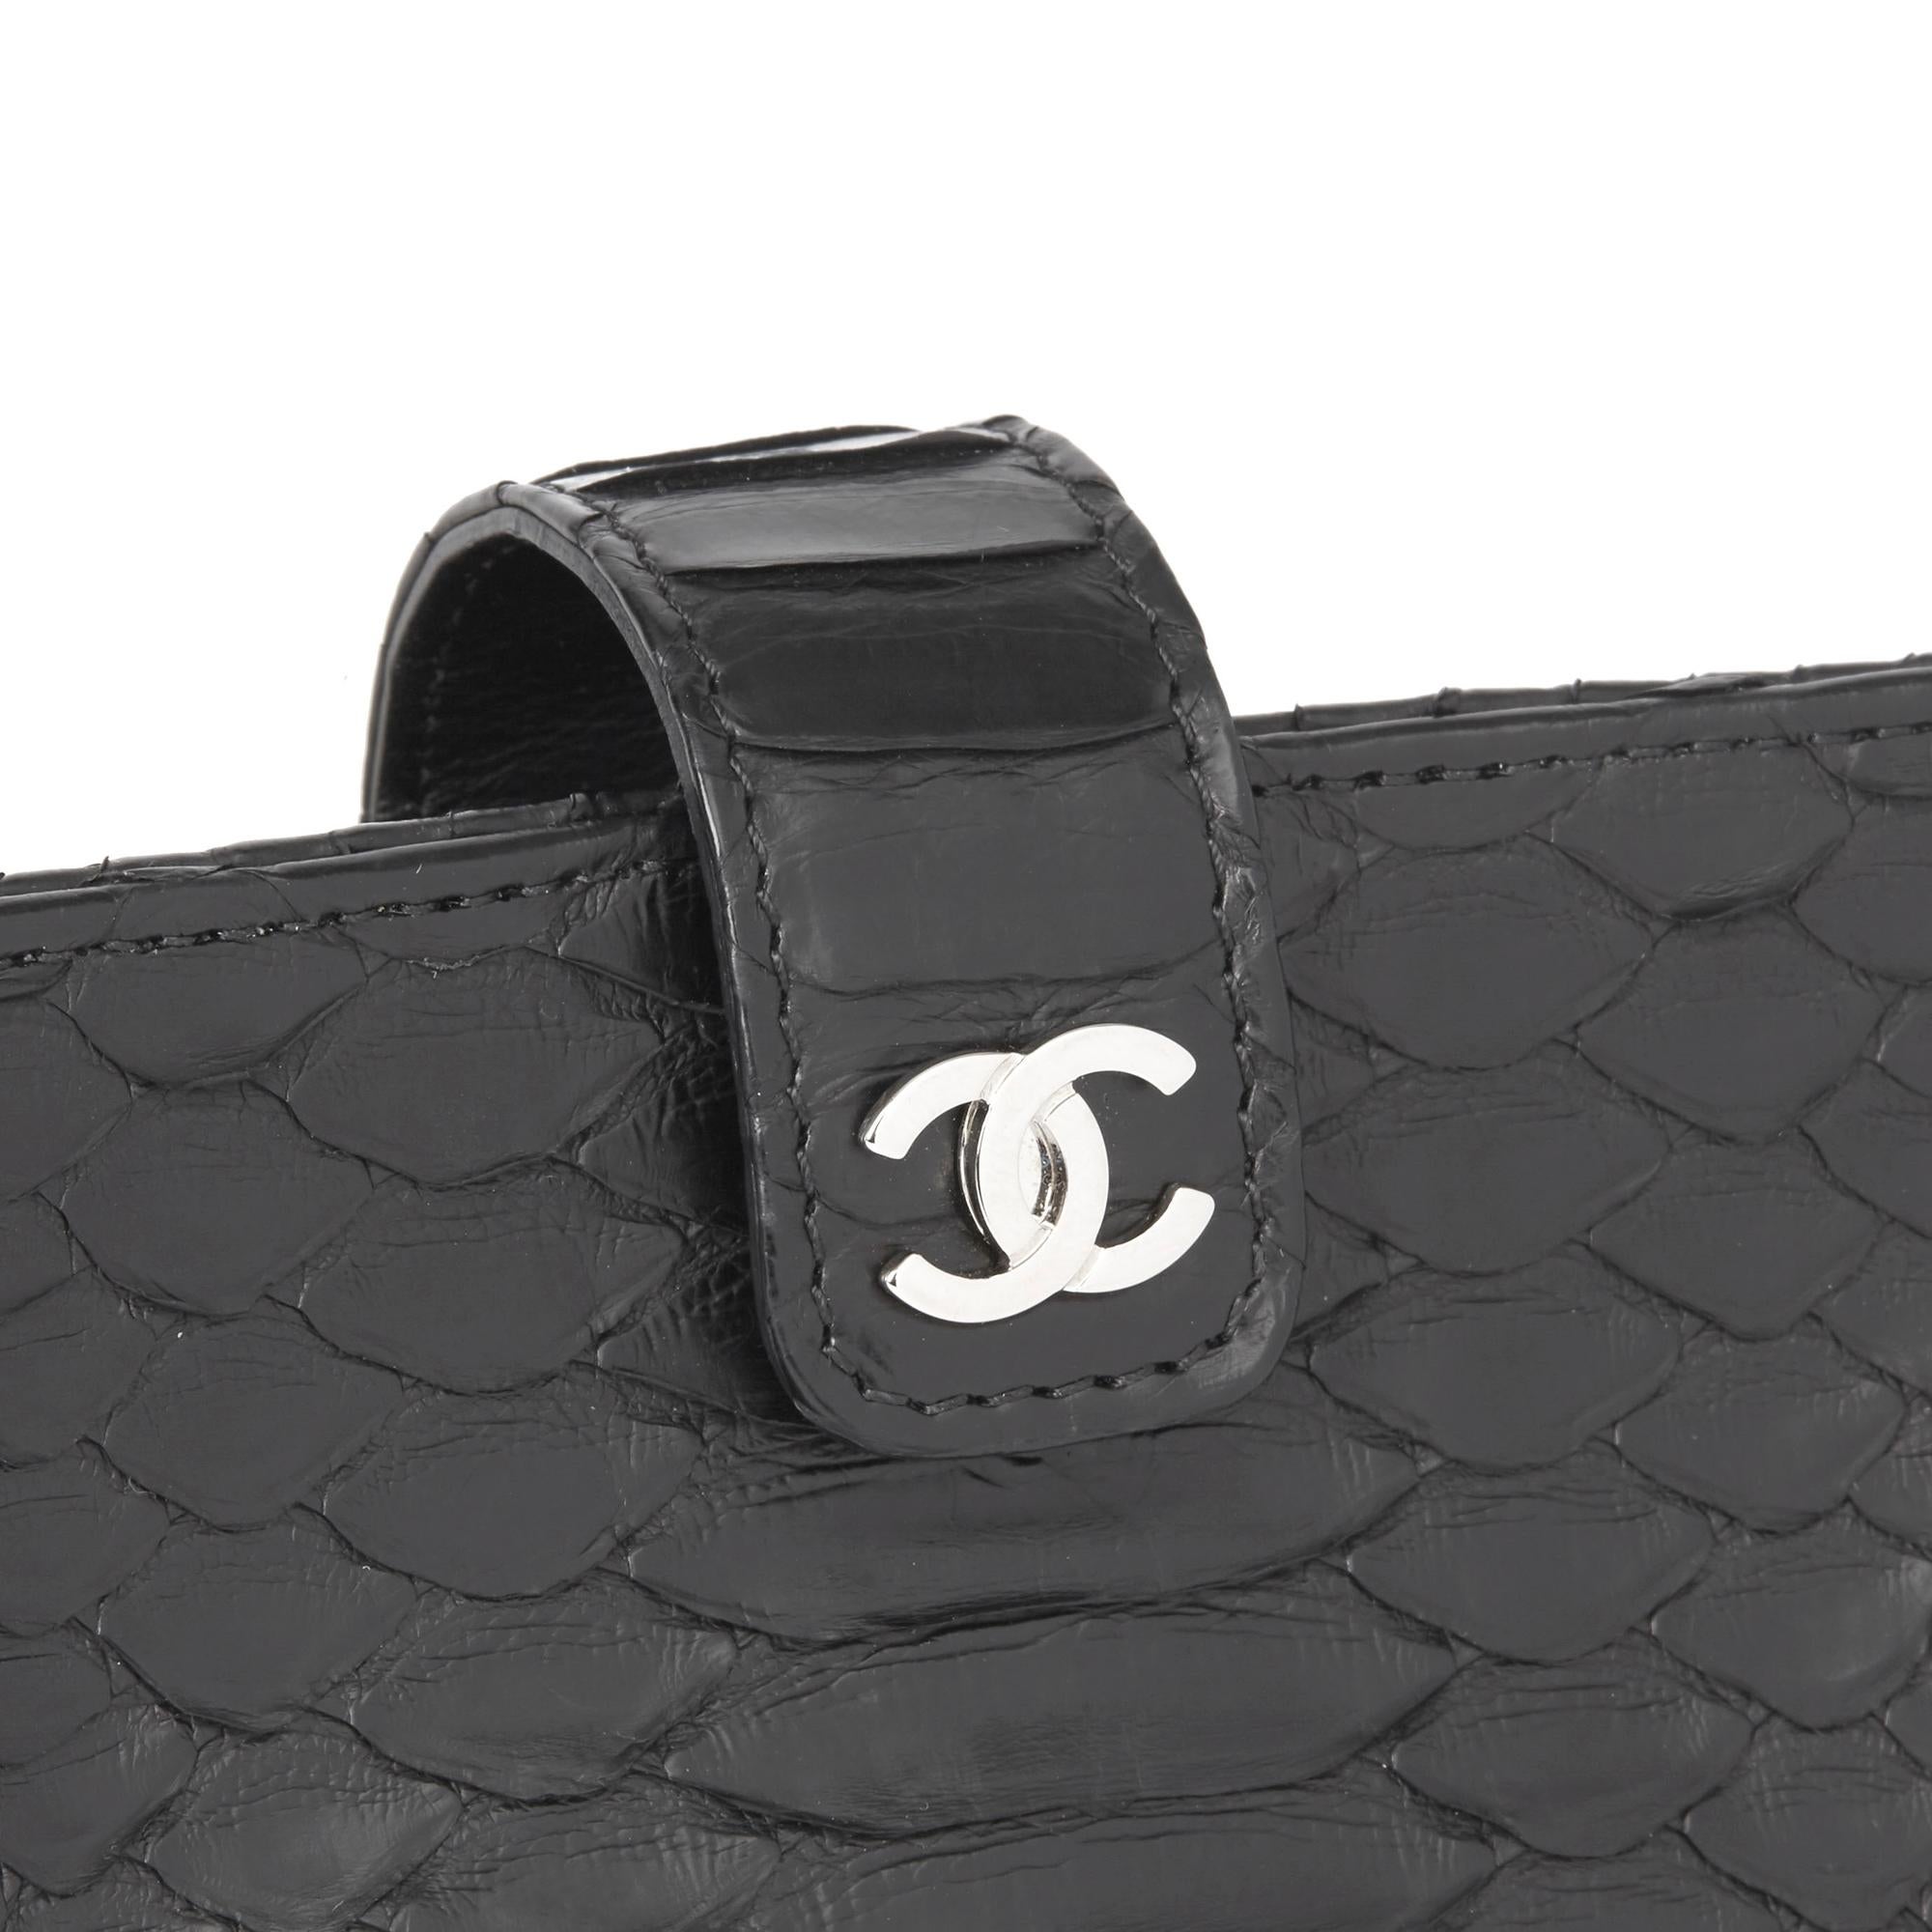 2015 Chanel Black Python Leather Pouch-on-Chain POC 2